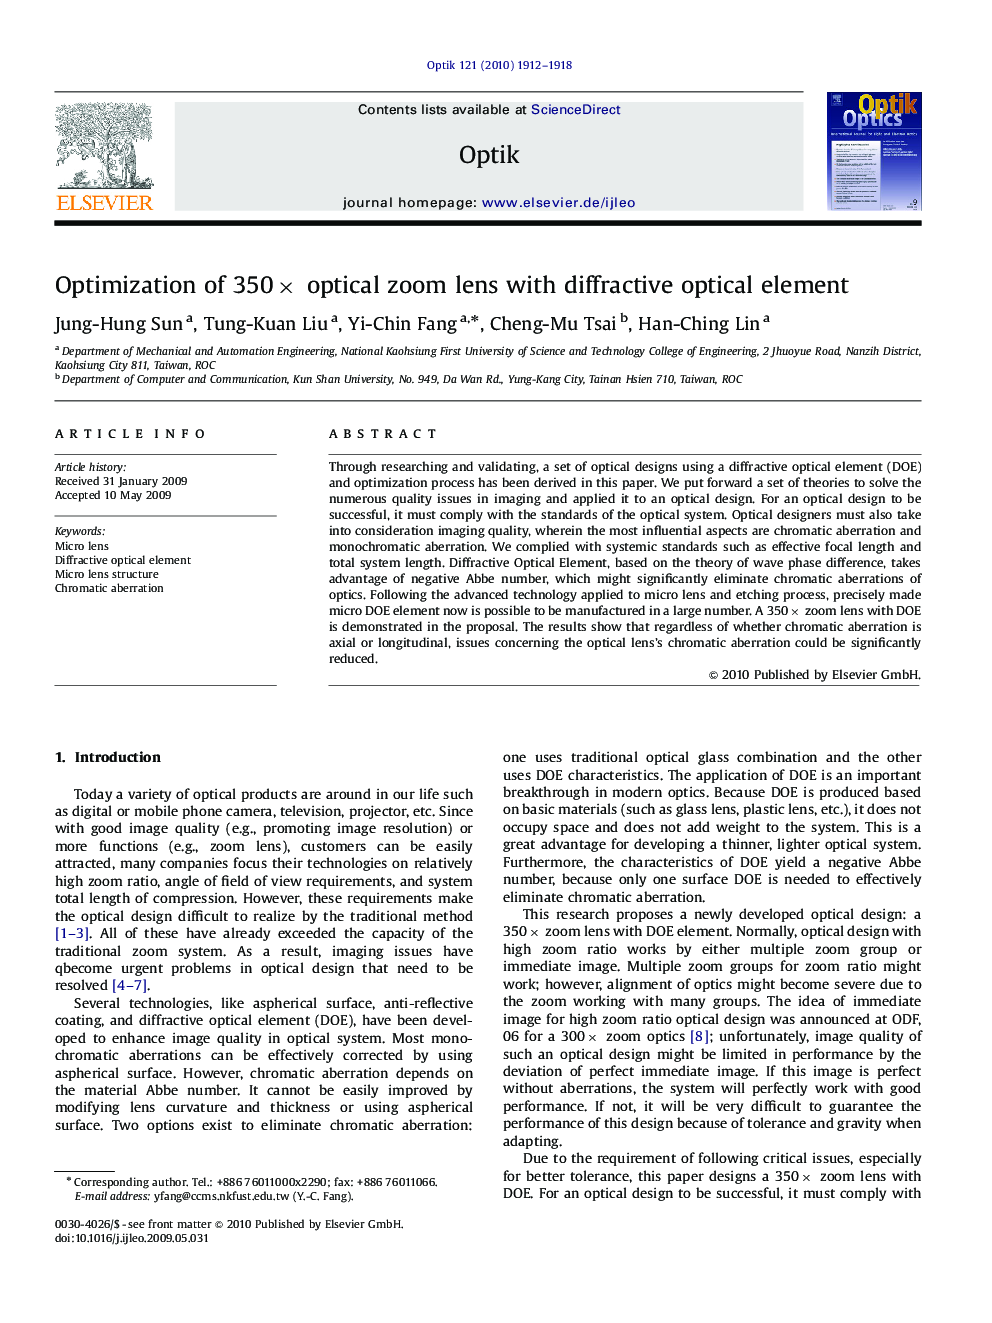 Optimization of 350× optical zoom lens with diffractive optical element